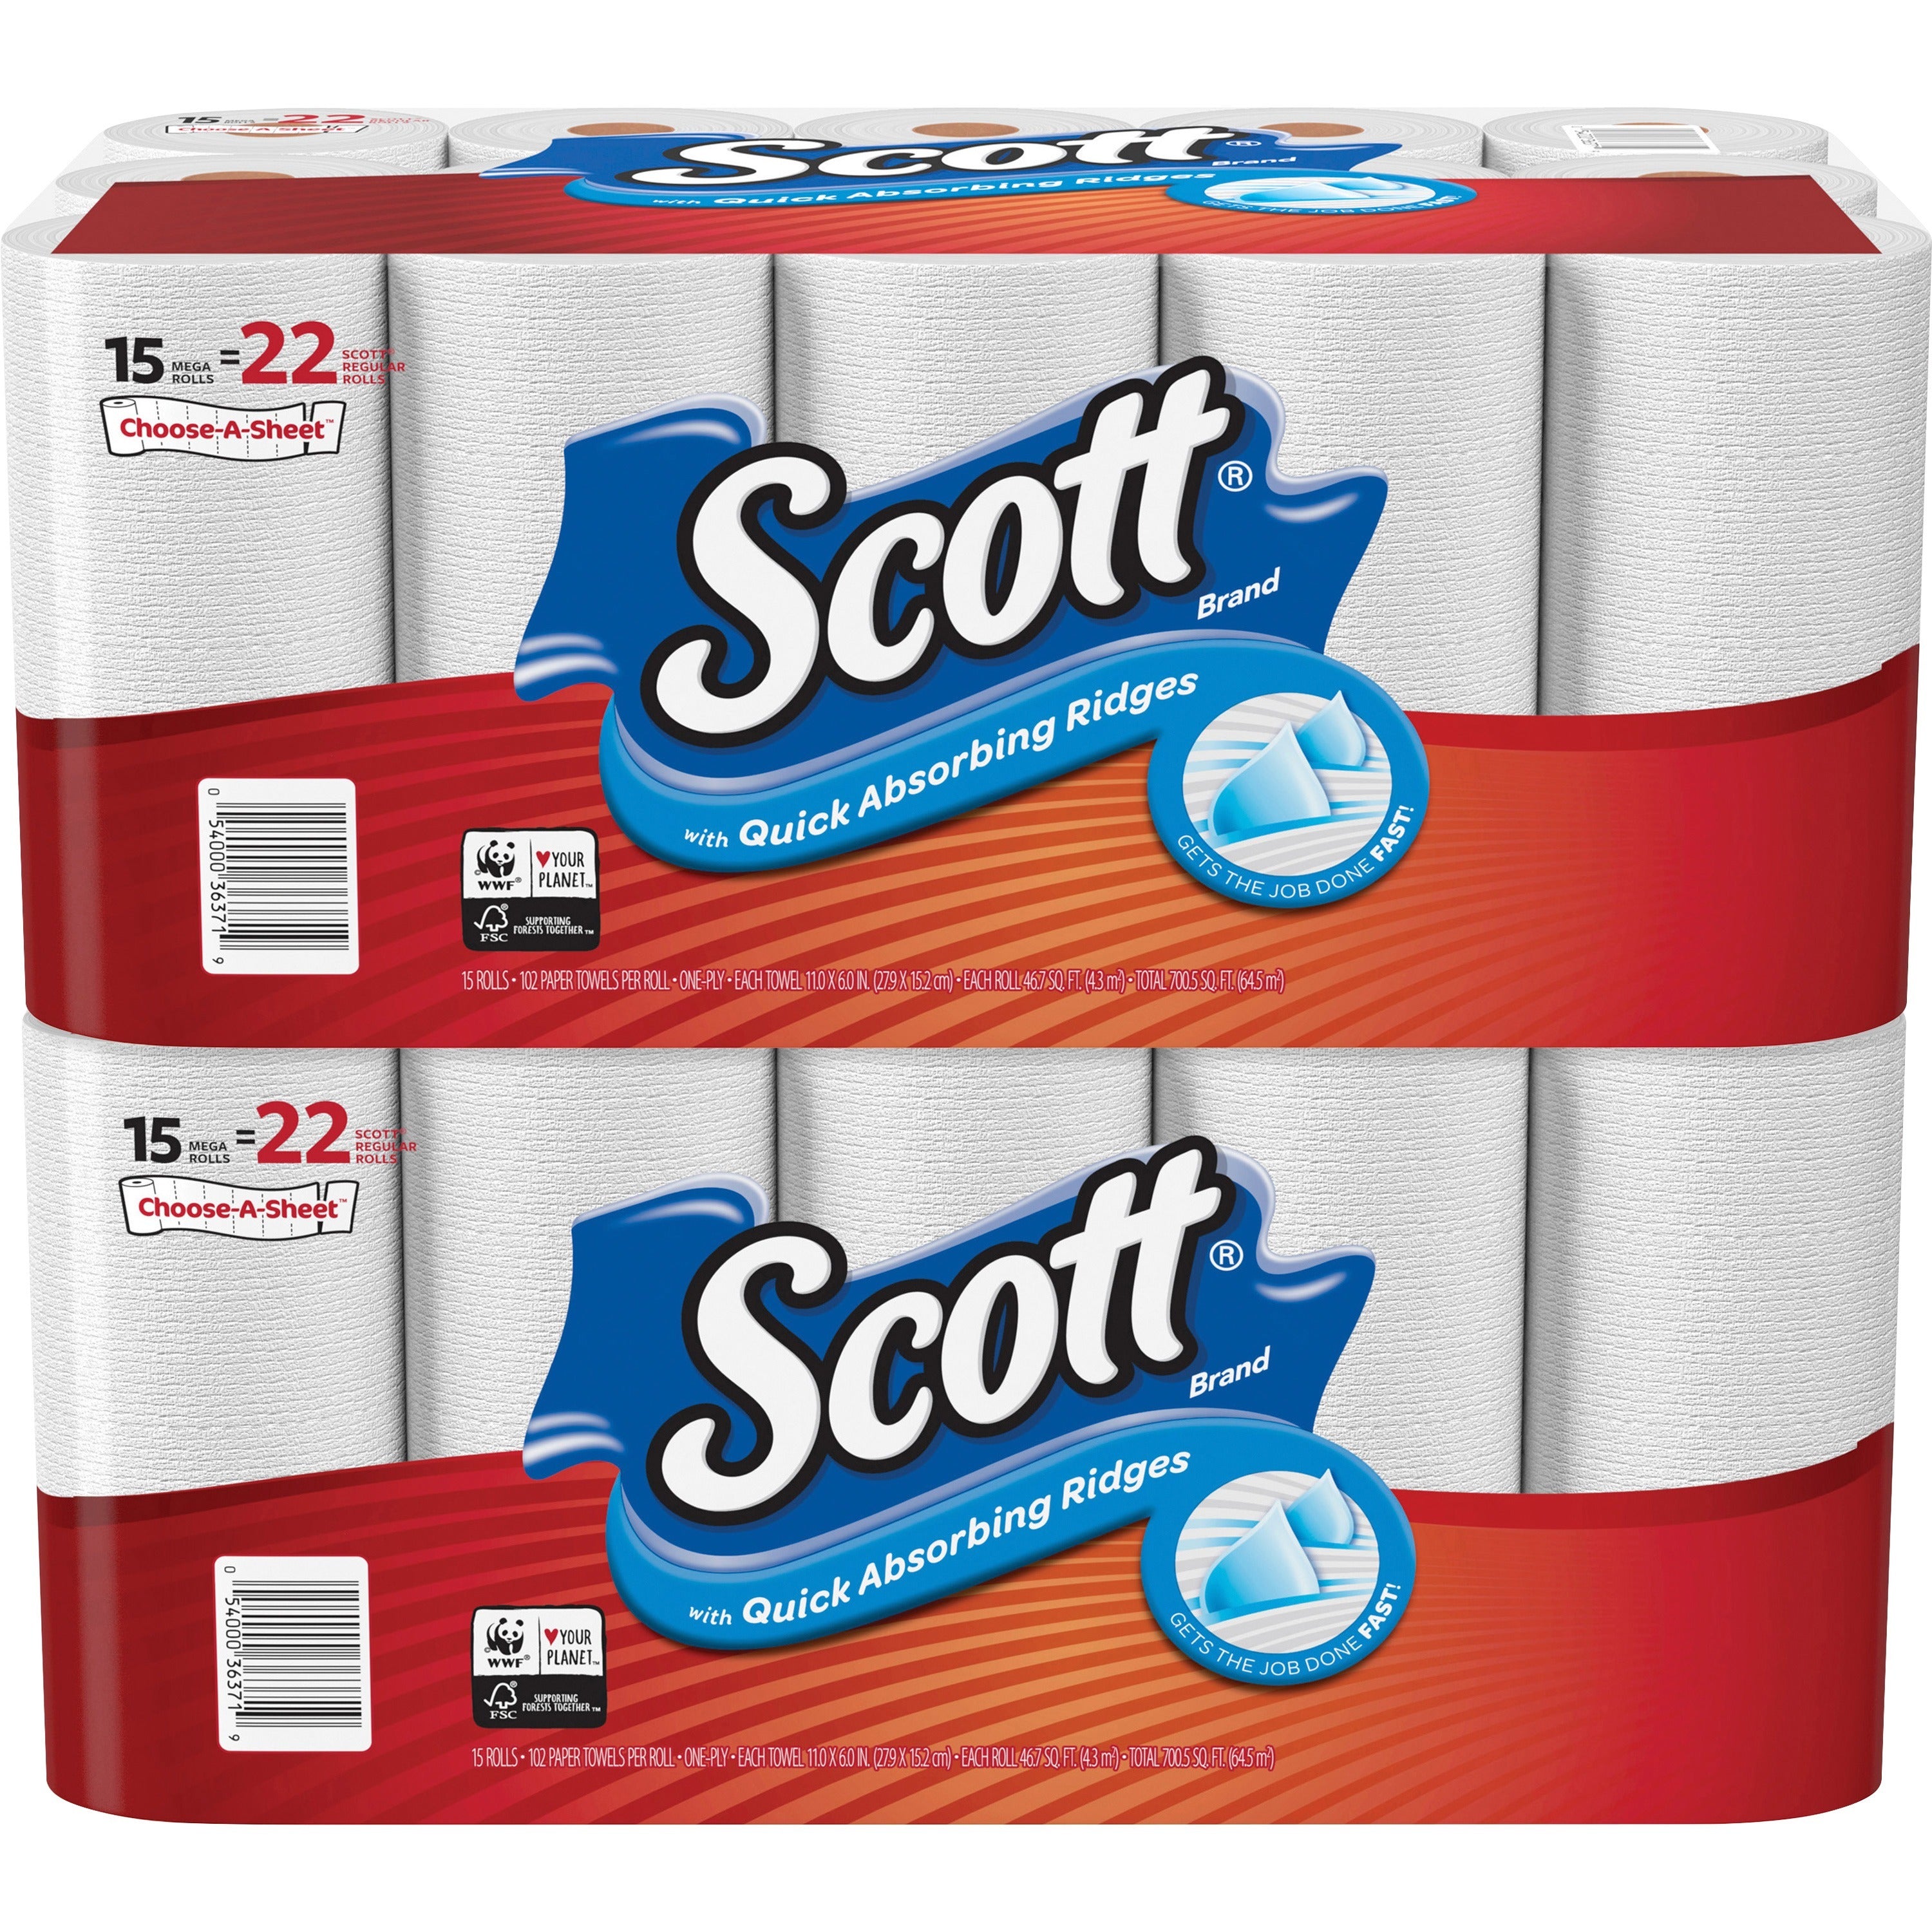 scott-choose-a-sheet-paper-towels-mega-rolls-1-ply-102-sheets-roll-white-perforated-absorbent-durable-for-home-office-school-15-rolls-per-pack-2-carton_kcc36371ct - 1